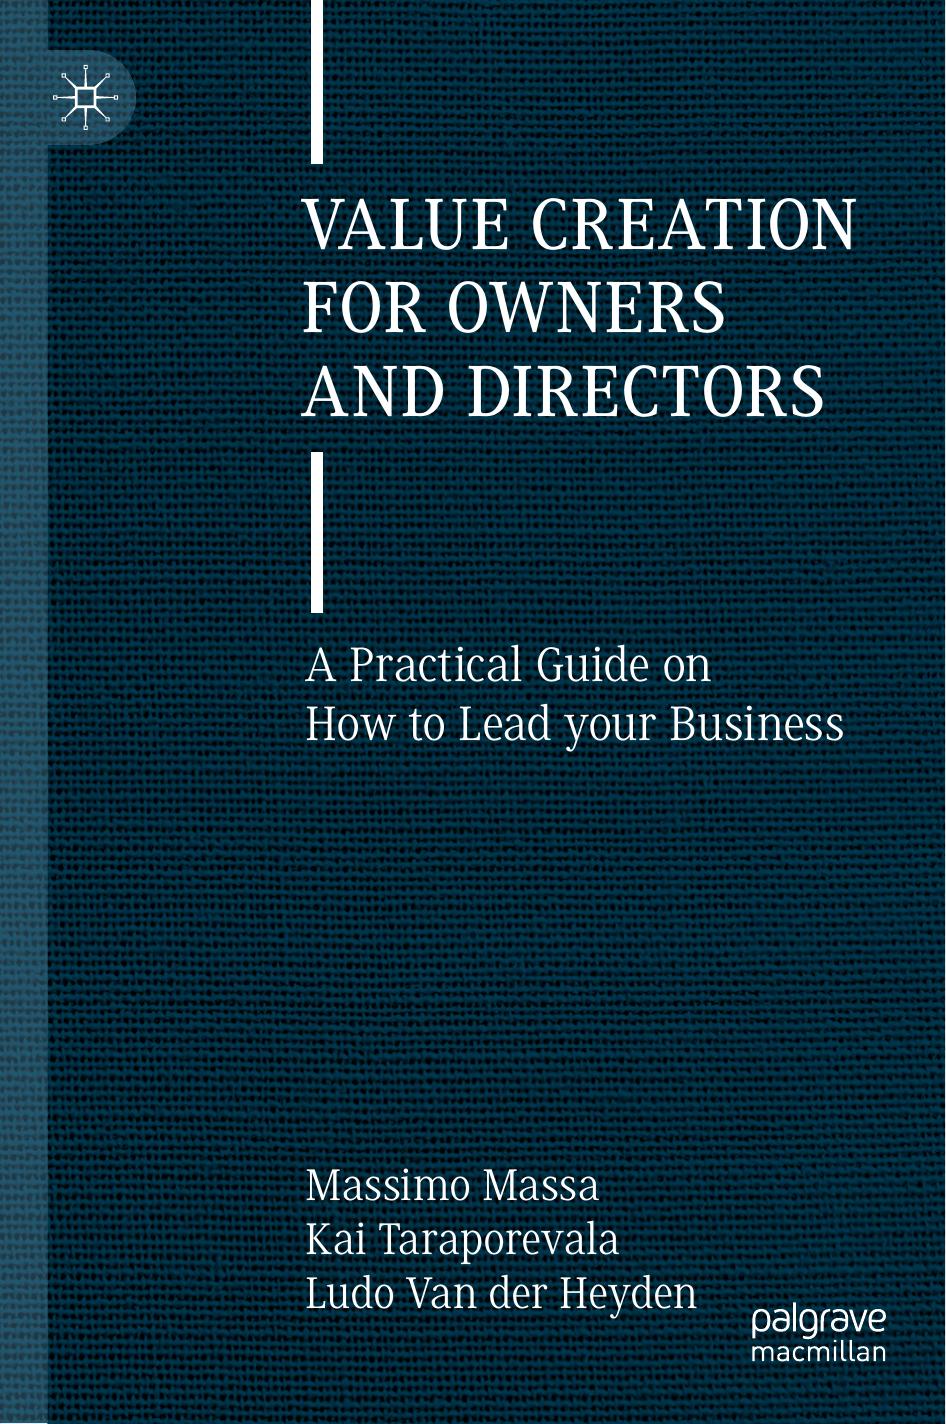 Value Creation for Owners and Directors: A Practical Guide on How to Lead your Business by Massimo Massa Kai Taraporevala Ludo Van der Heyden